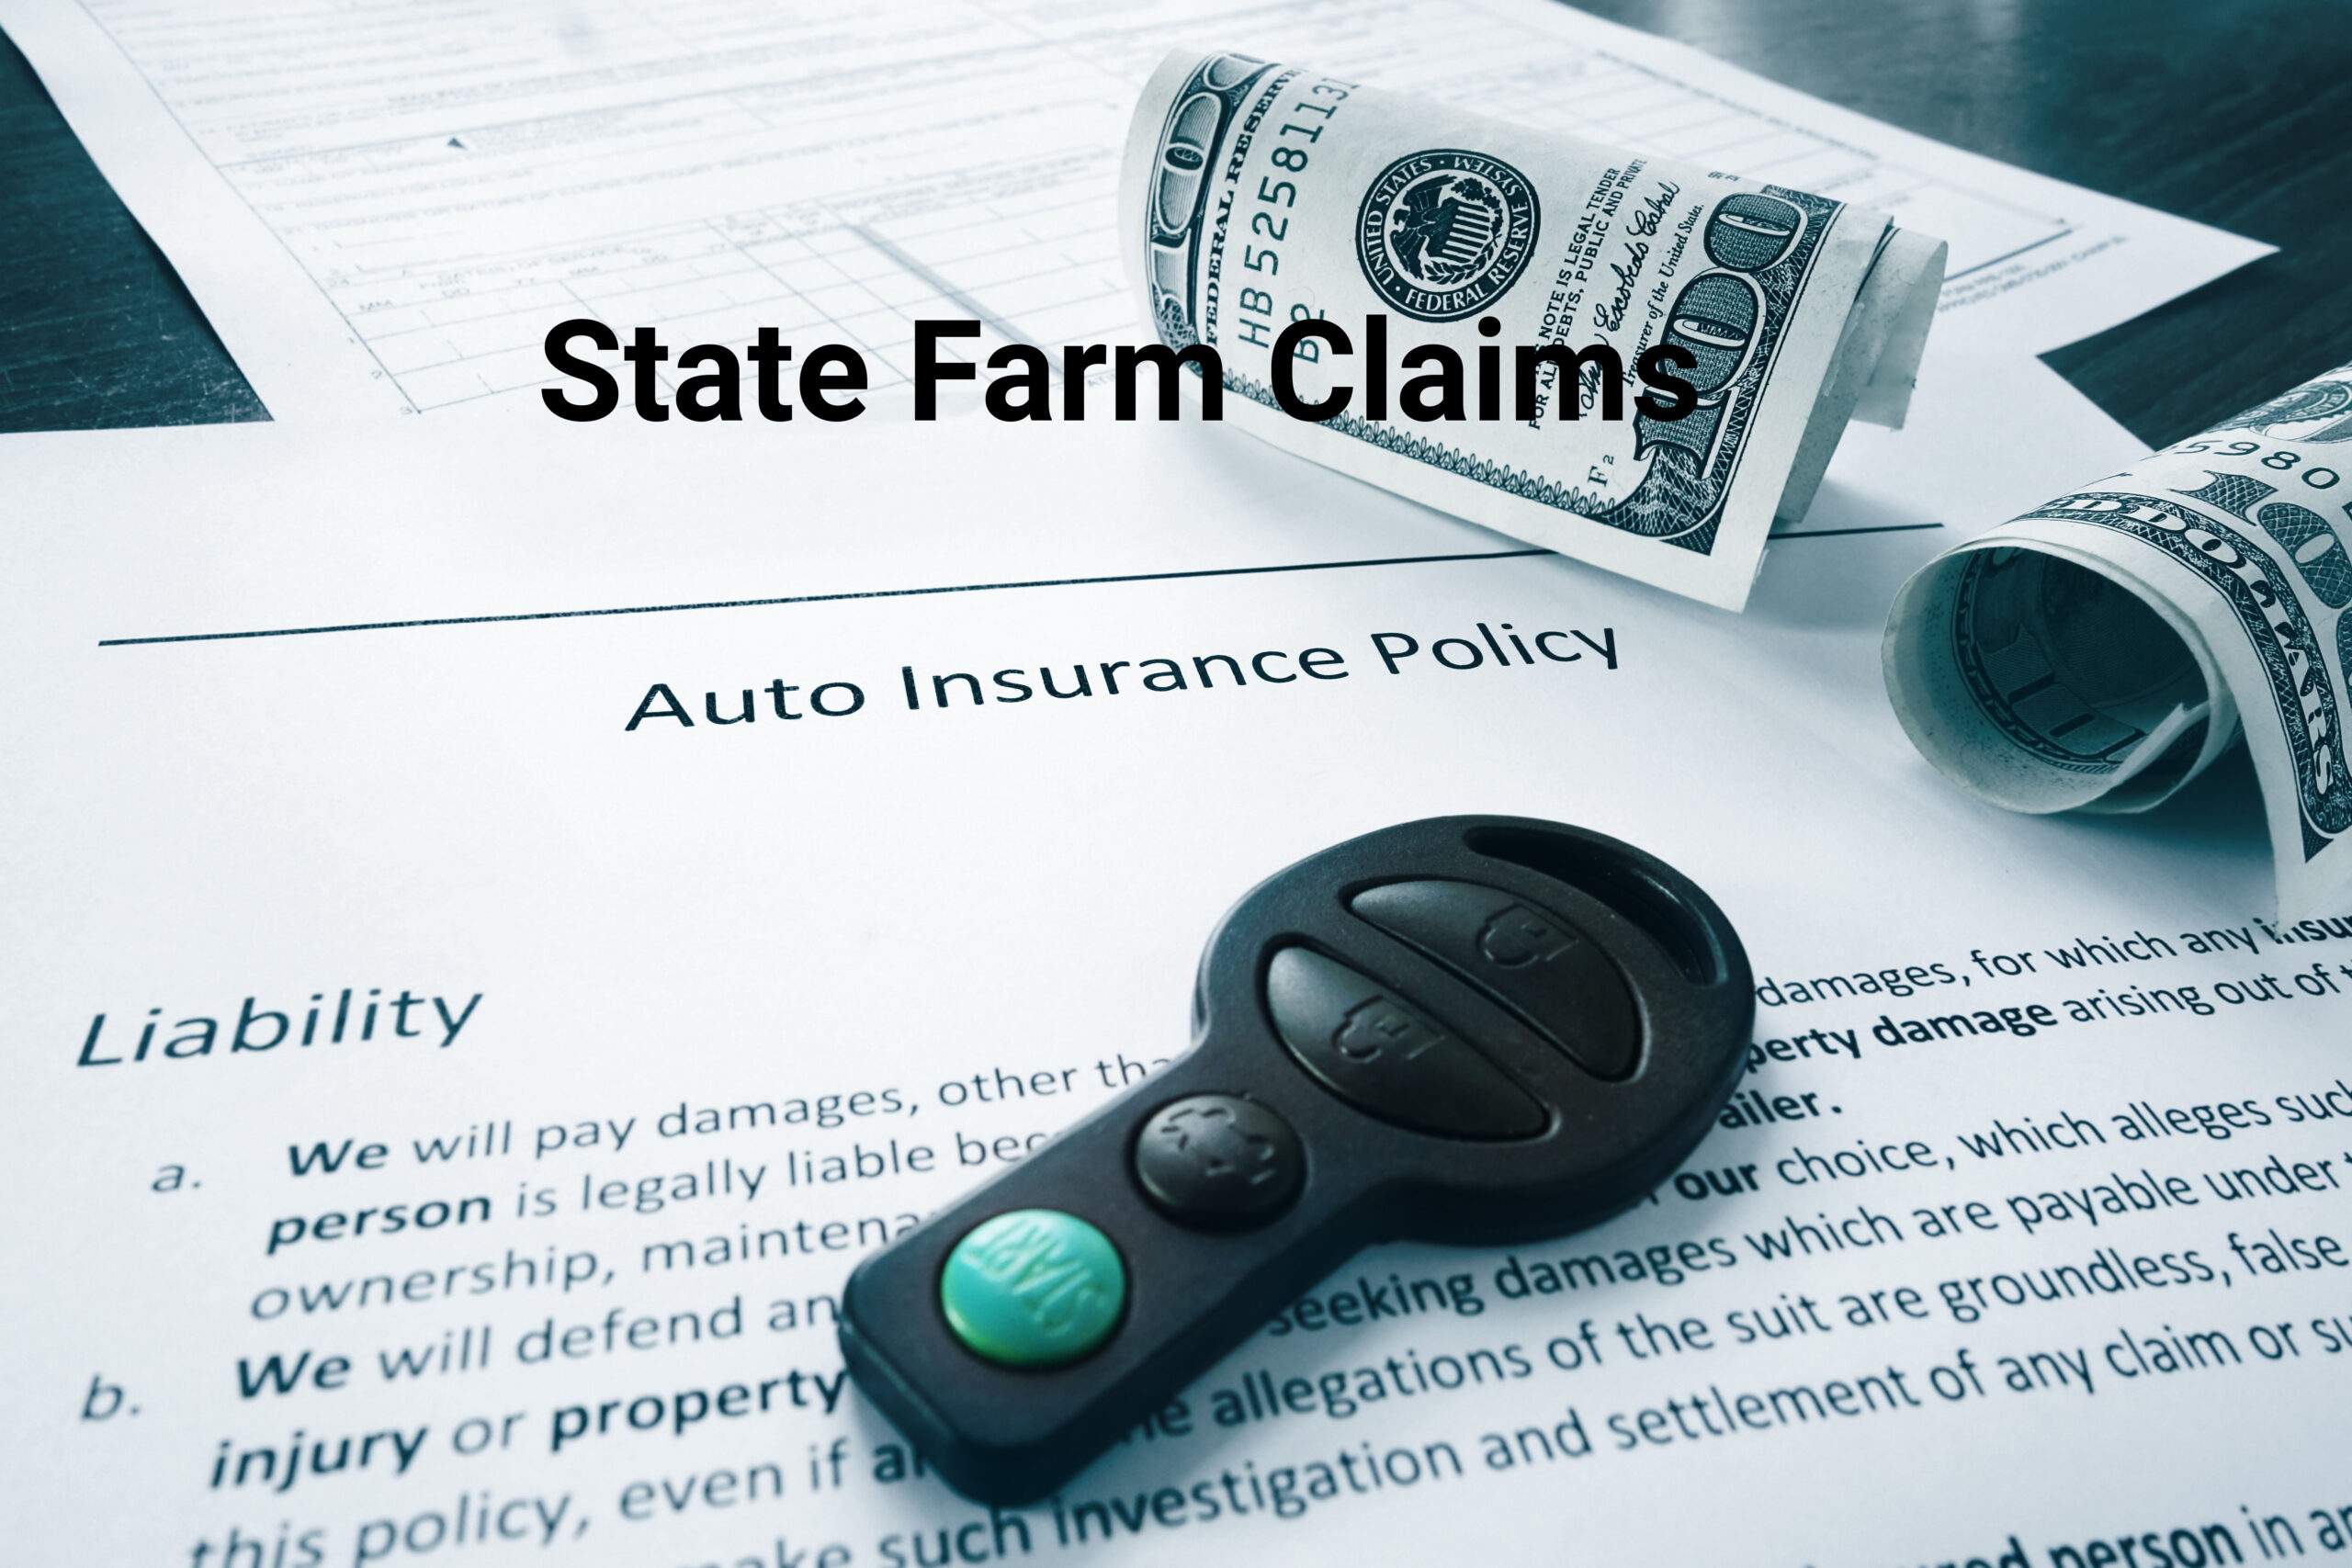 Car accident claims with State Farm